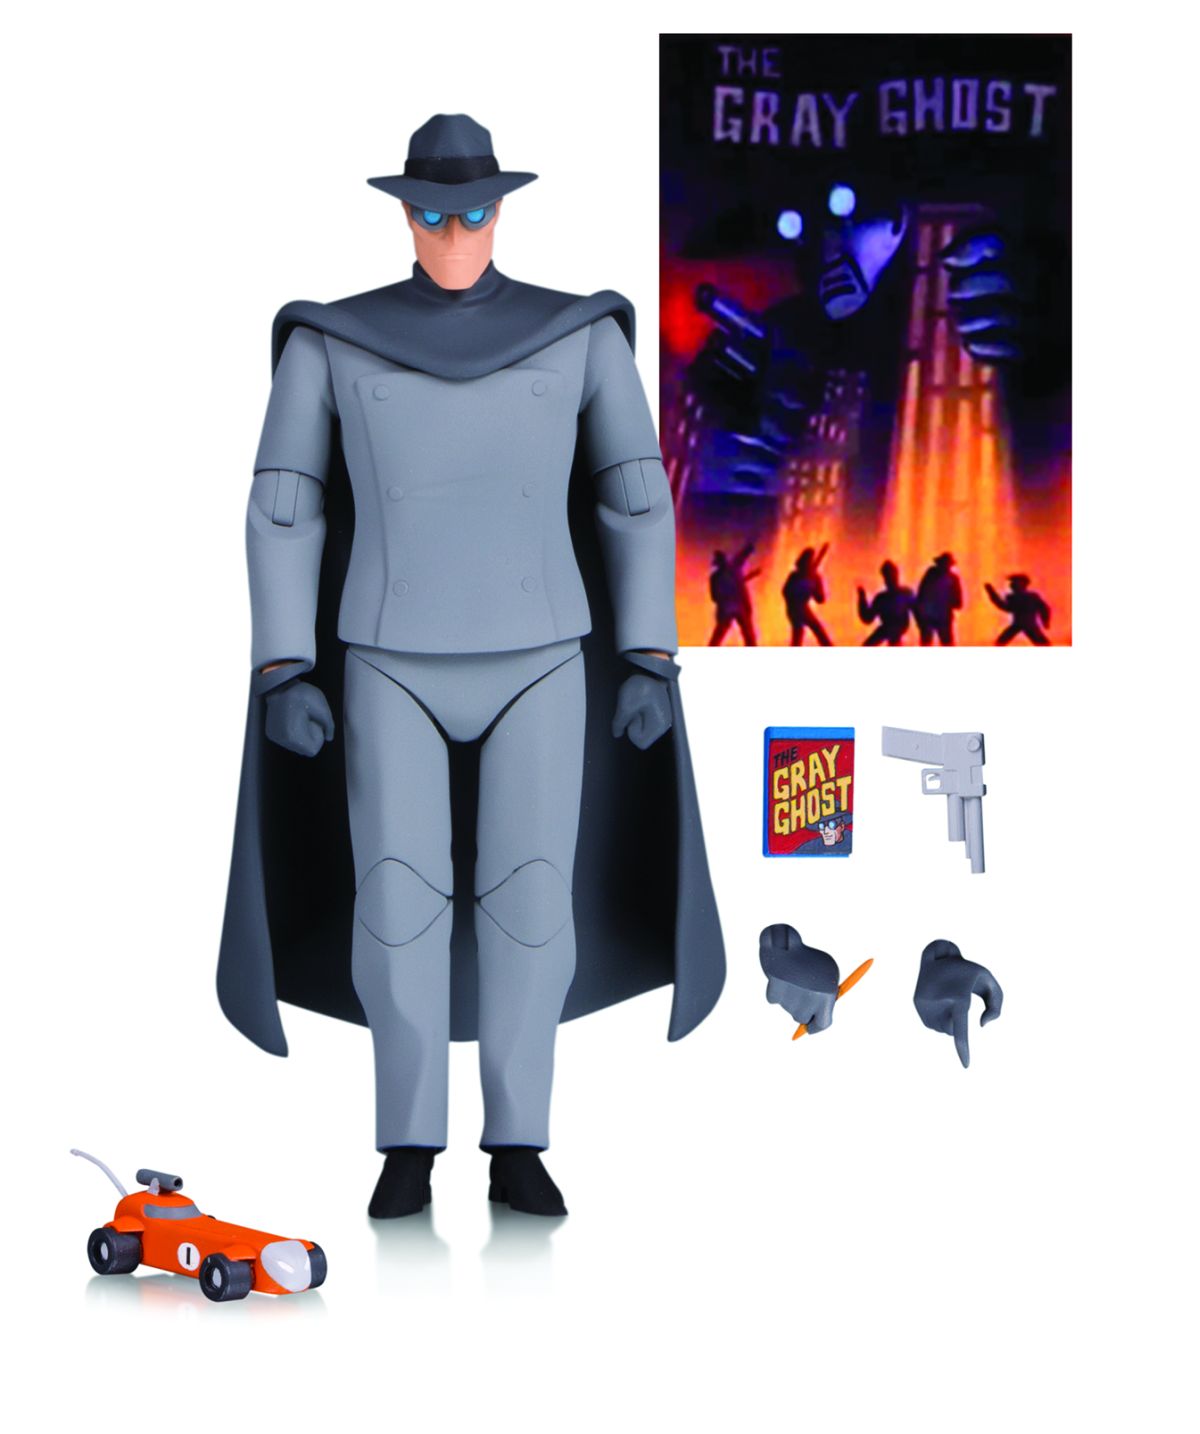 BATMAN: THE ANIMATED SERIES GRAY GHOST ACTION FIGURE